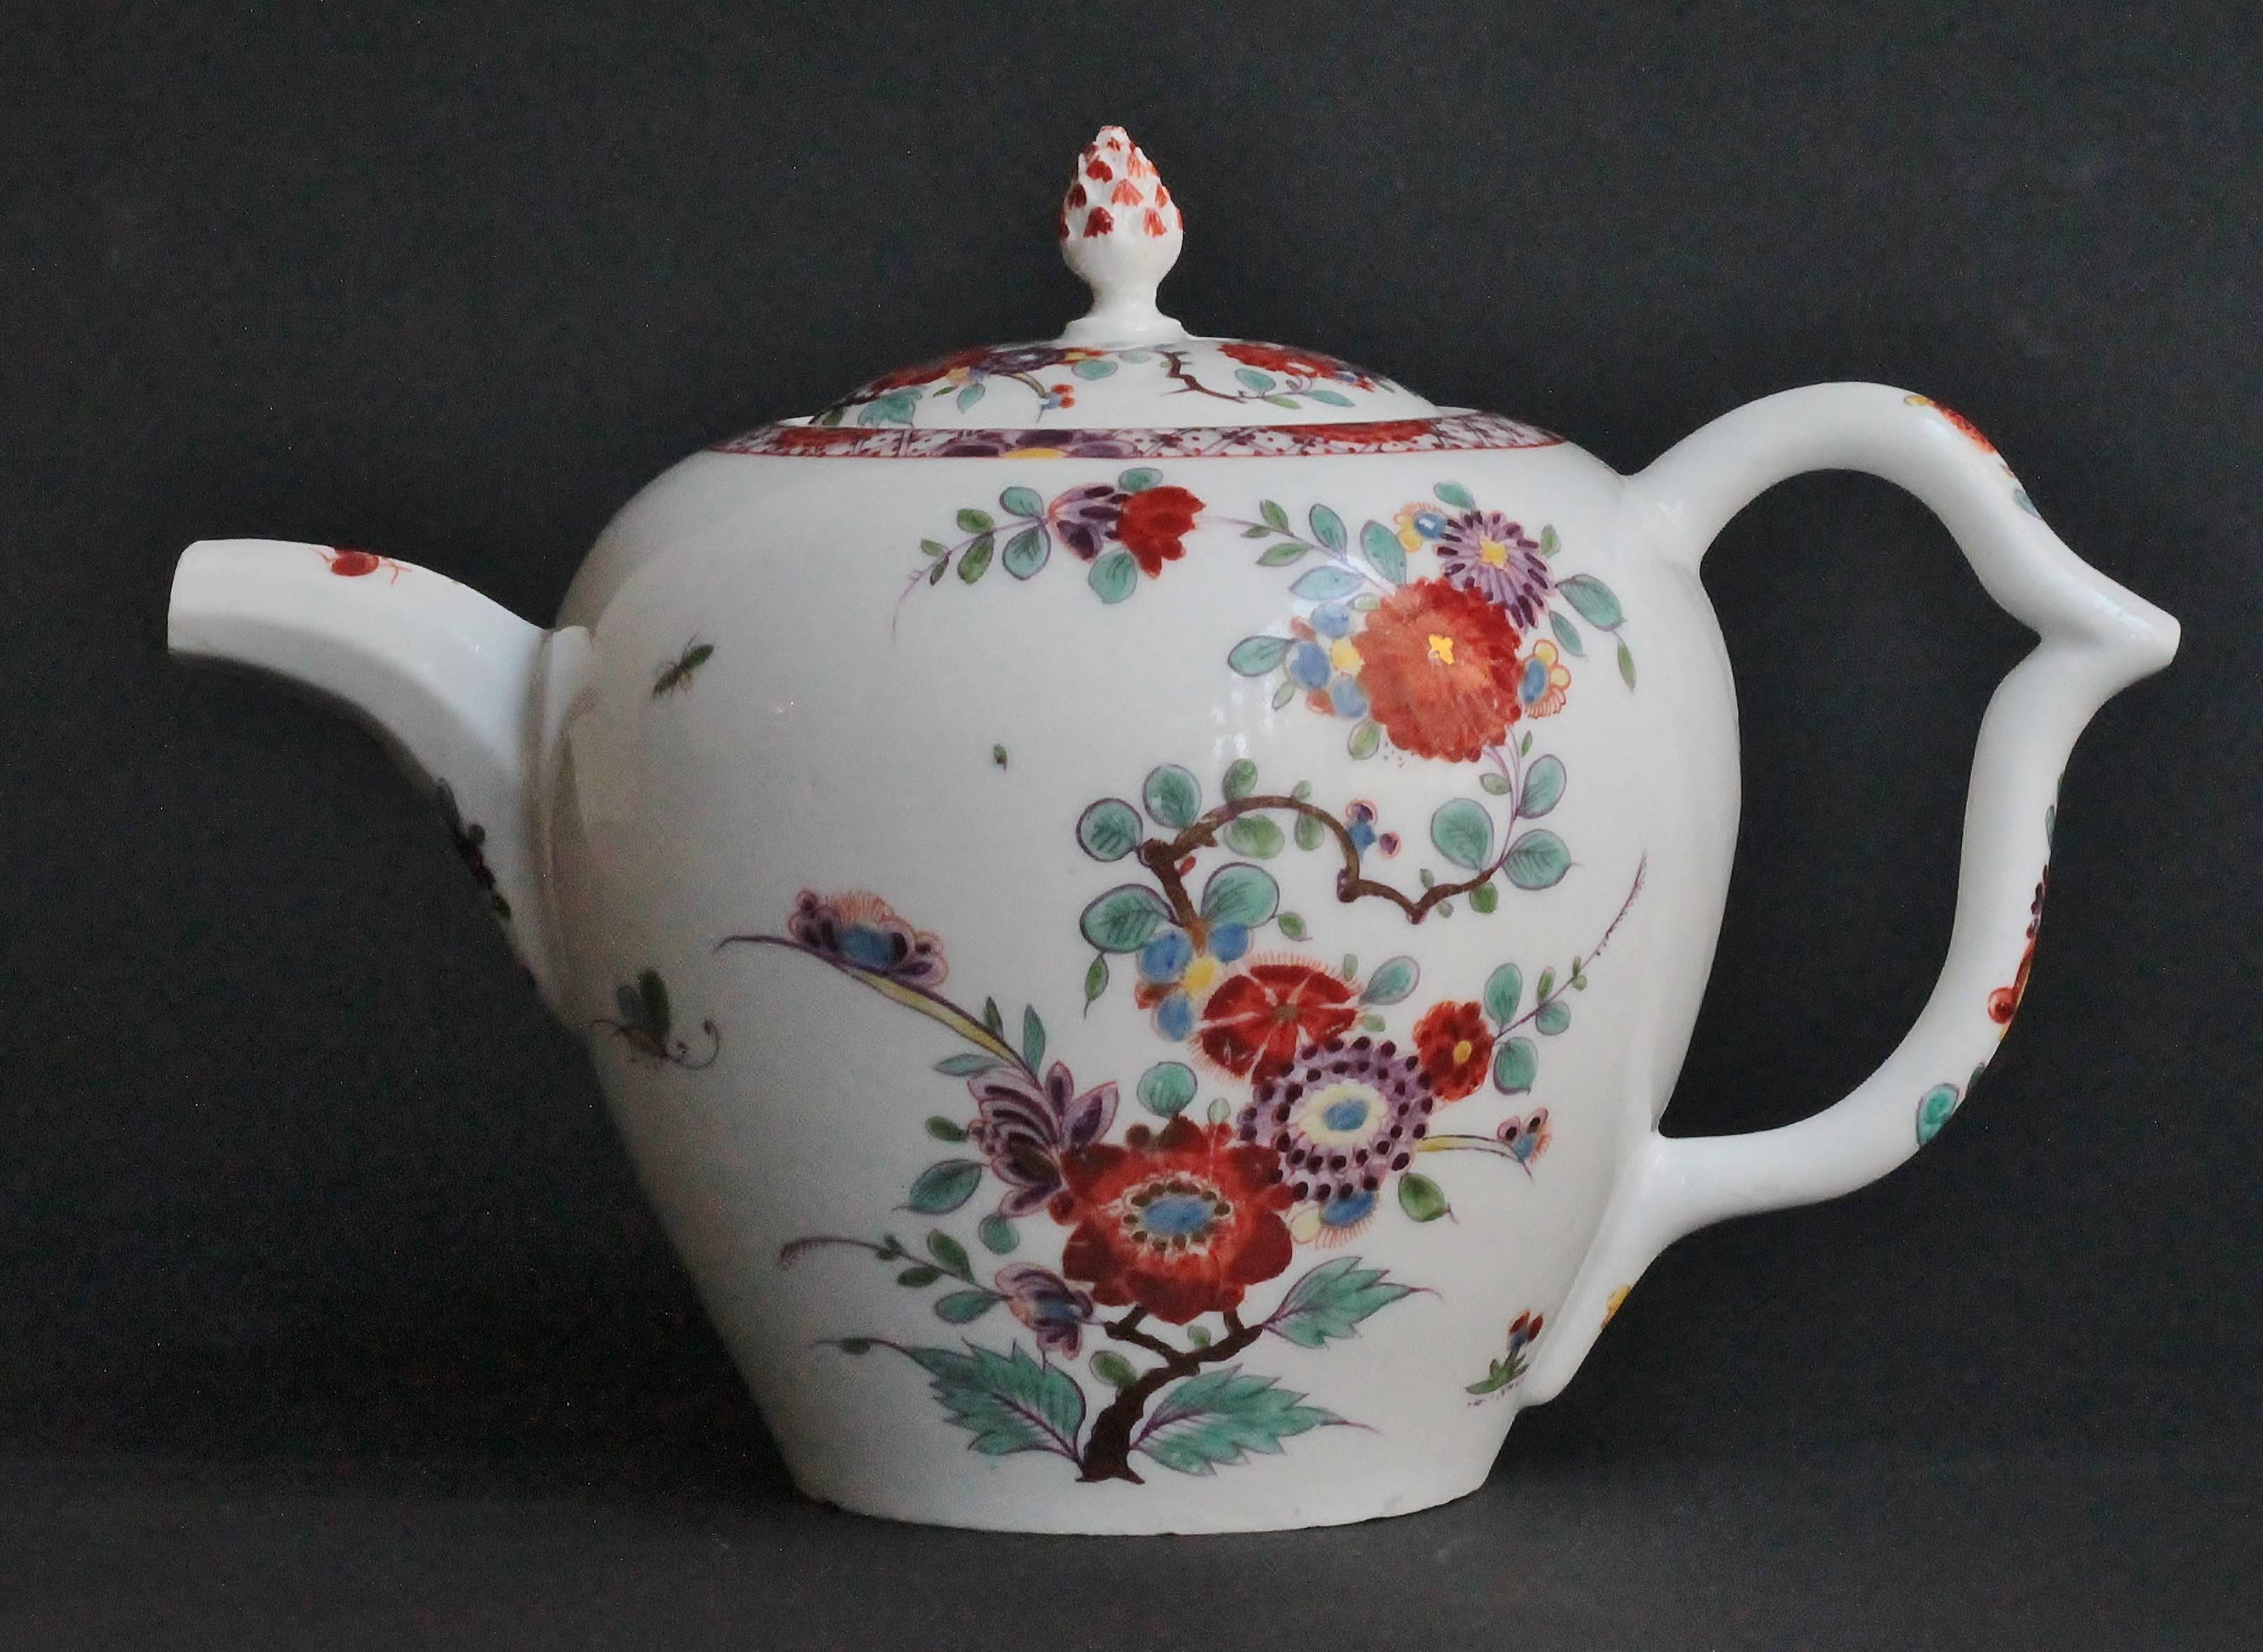 A Meissen (Saxe) porcelain teapot with polychrome Kakiemon decoration of flowers and foliage.
Attributed at the painter Adam Friedrich von Löwenfinck (1714-1754) specialist of India flowers at Meissen (1727-1736), circa 1728-1730. Measures: Height: